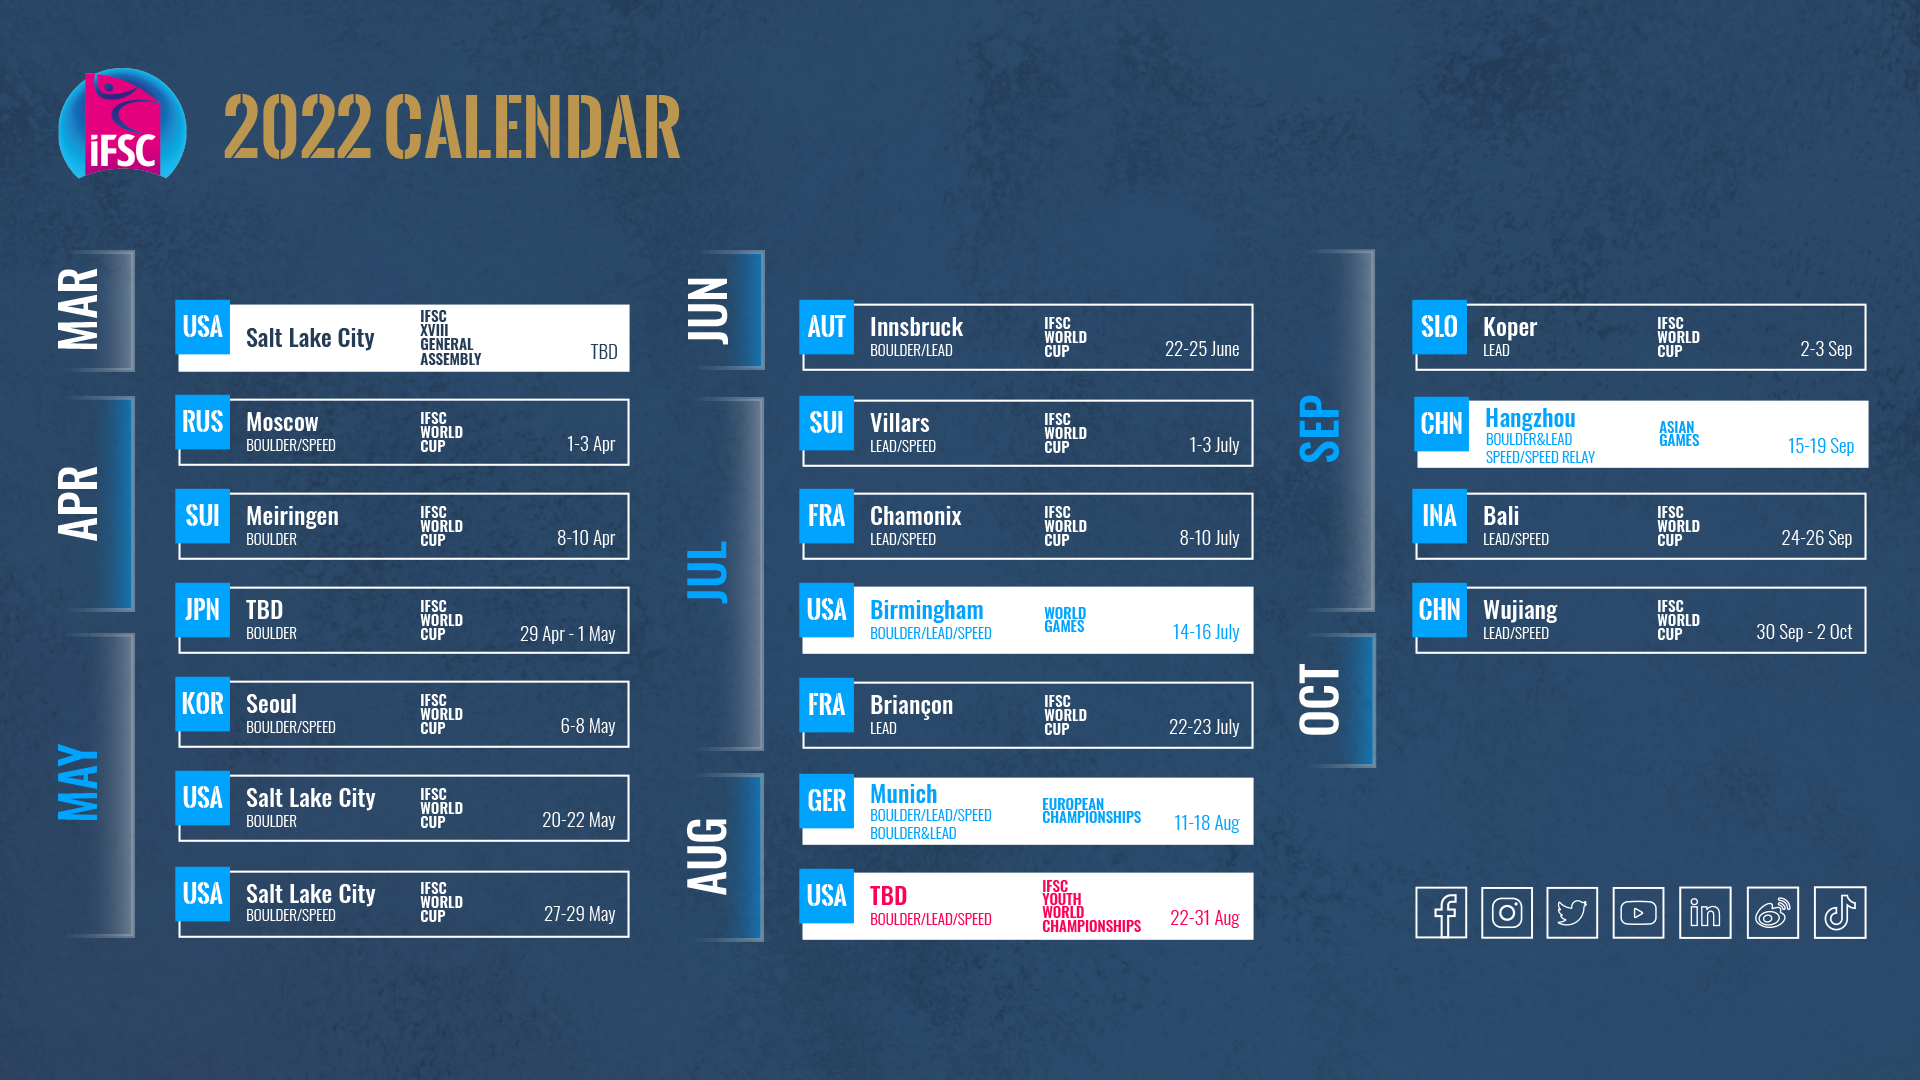 Koper and Wujiang make up the 13-event IFSC World Cup schedule ©IFSC